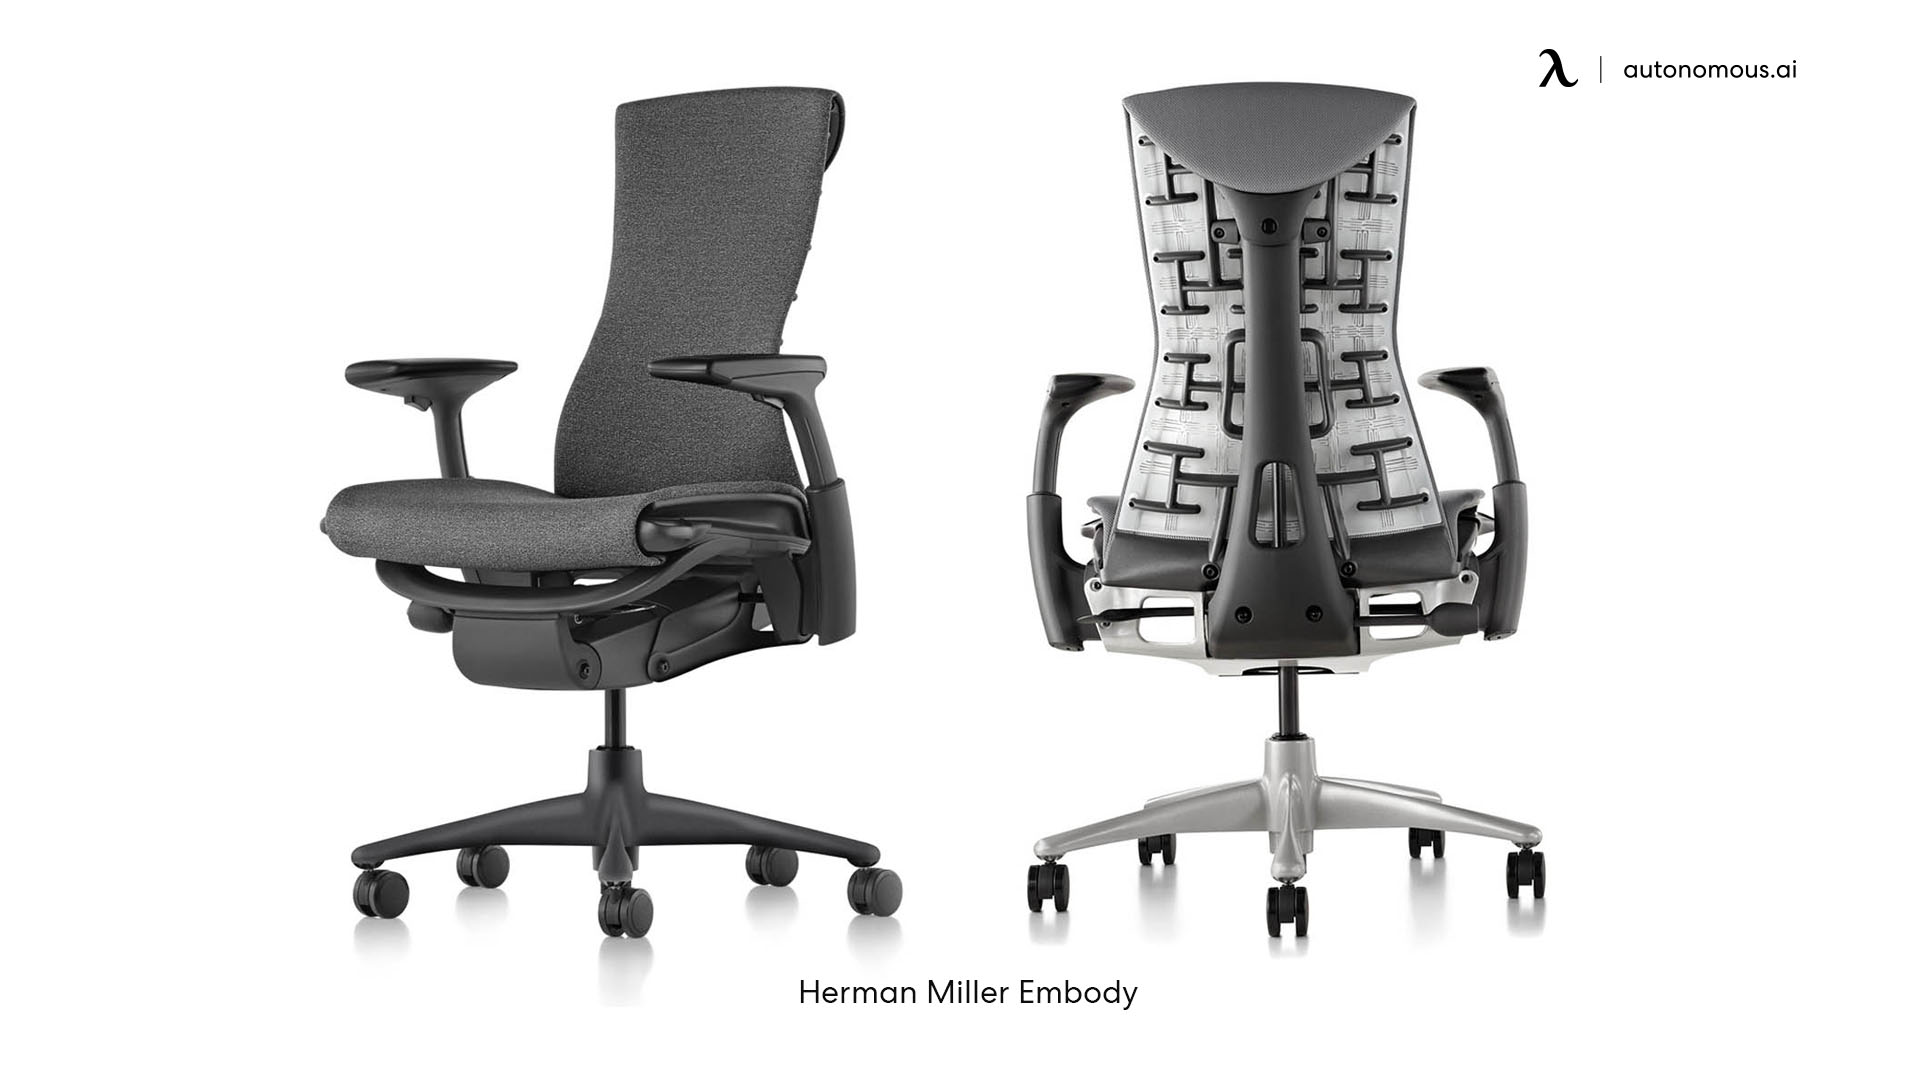 Embody comfy office chair by Herman Miller